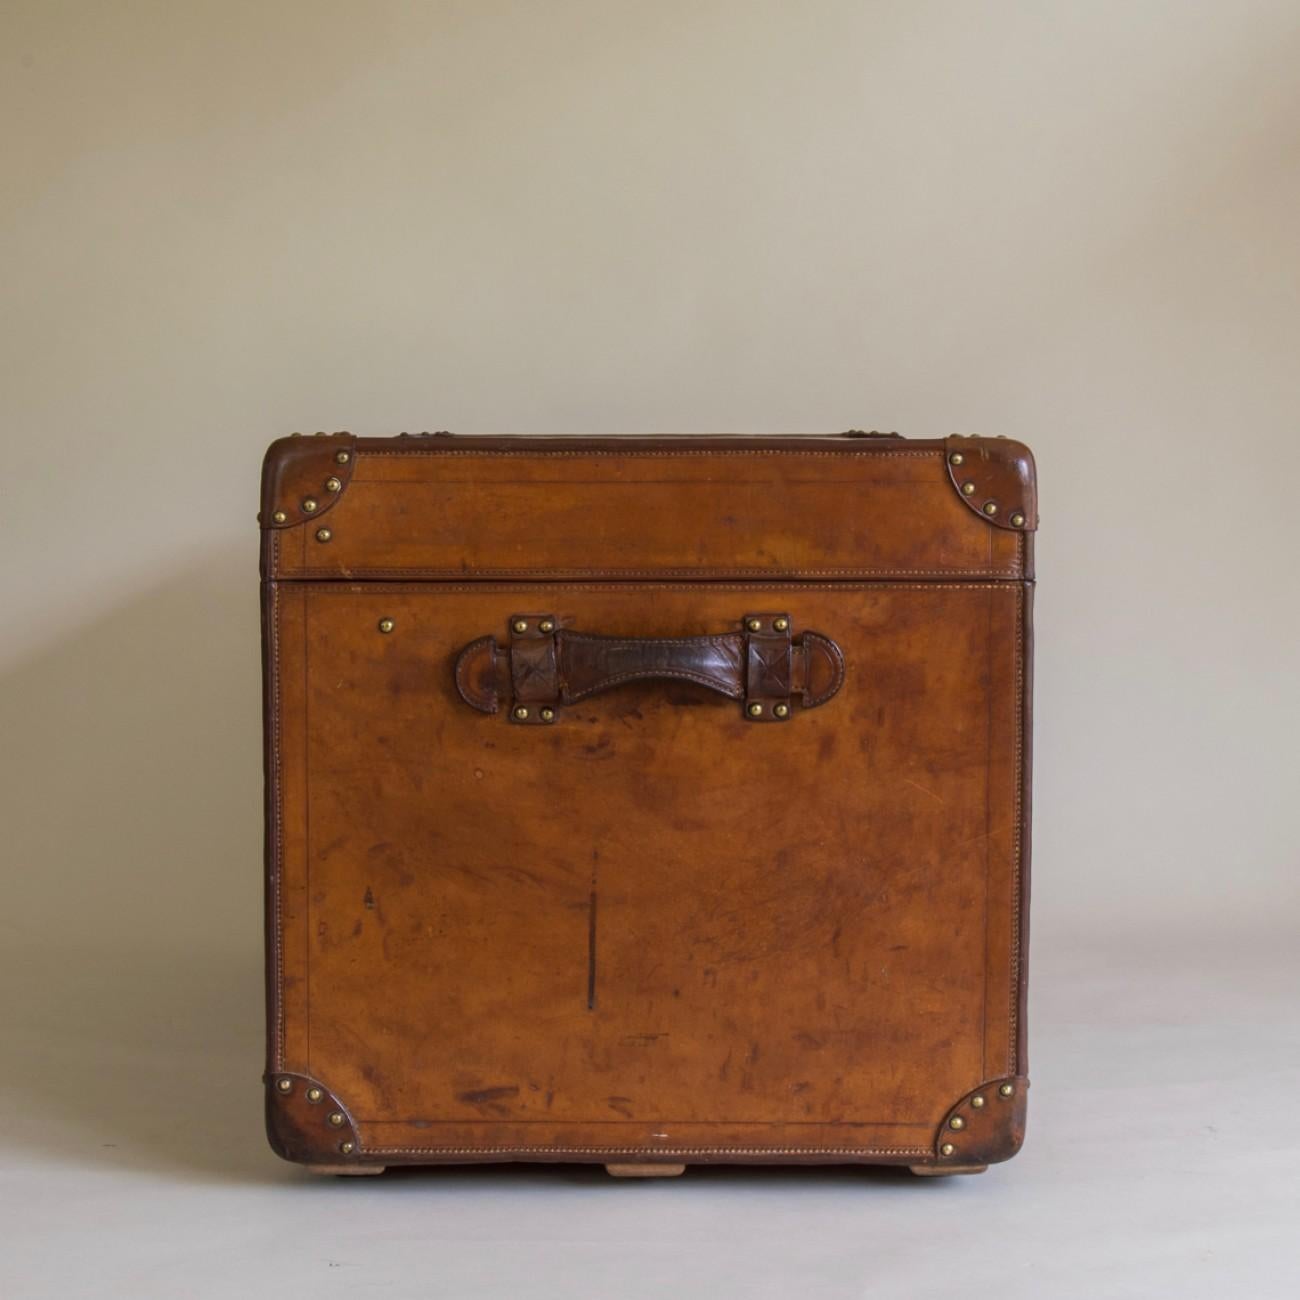 Goyard Leather Steamer Trunk, circa 1910 In Good Condition For Sale In London, GB